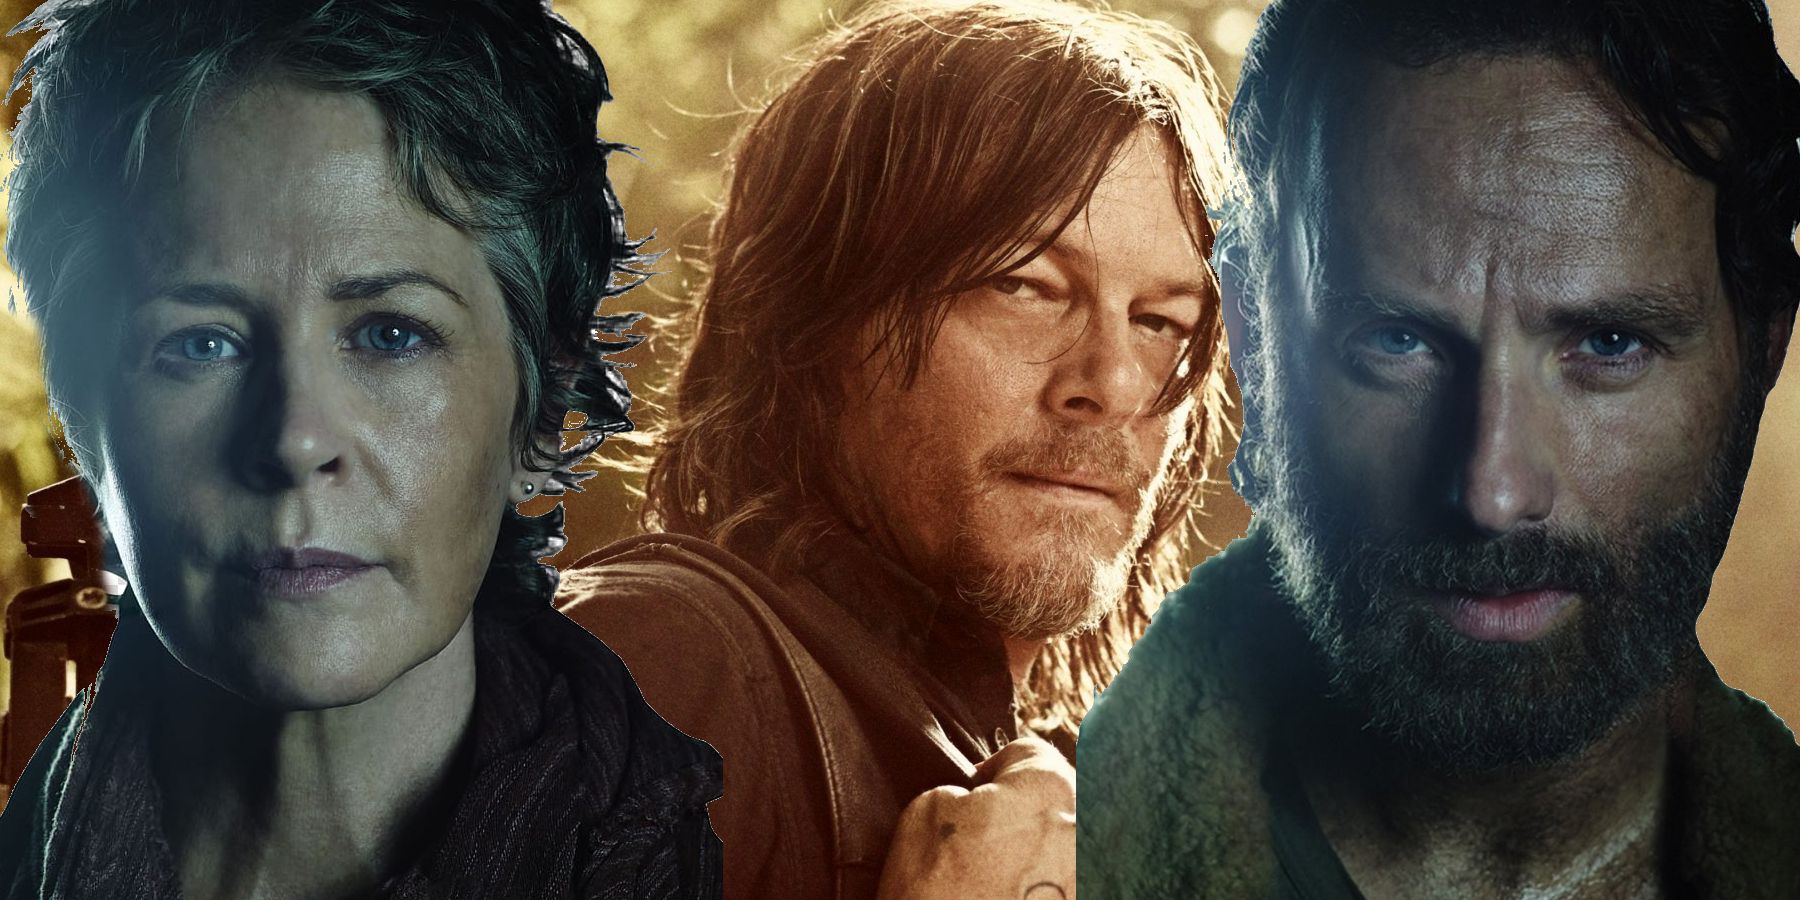 Daryl Dixon, Carol Peletier, and Rick Grimes posters for the Walking Dead